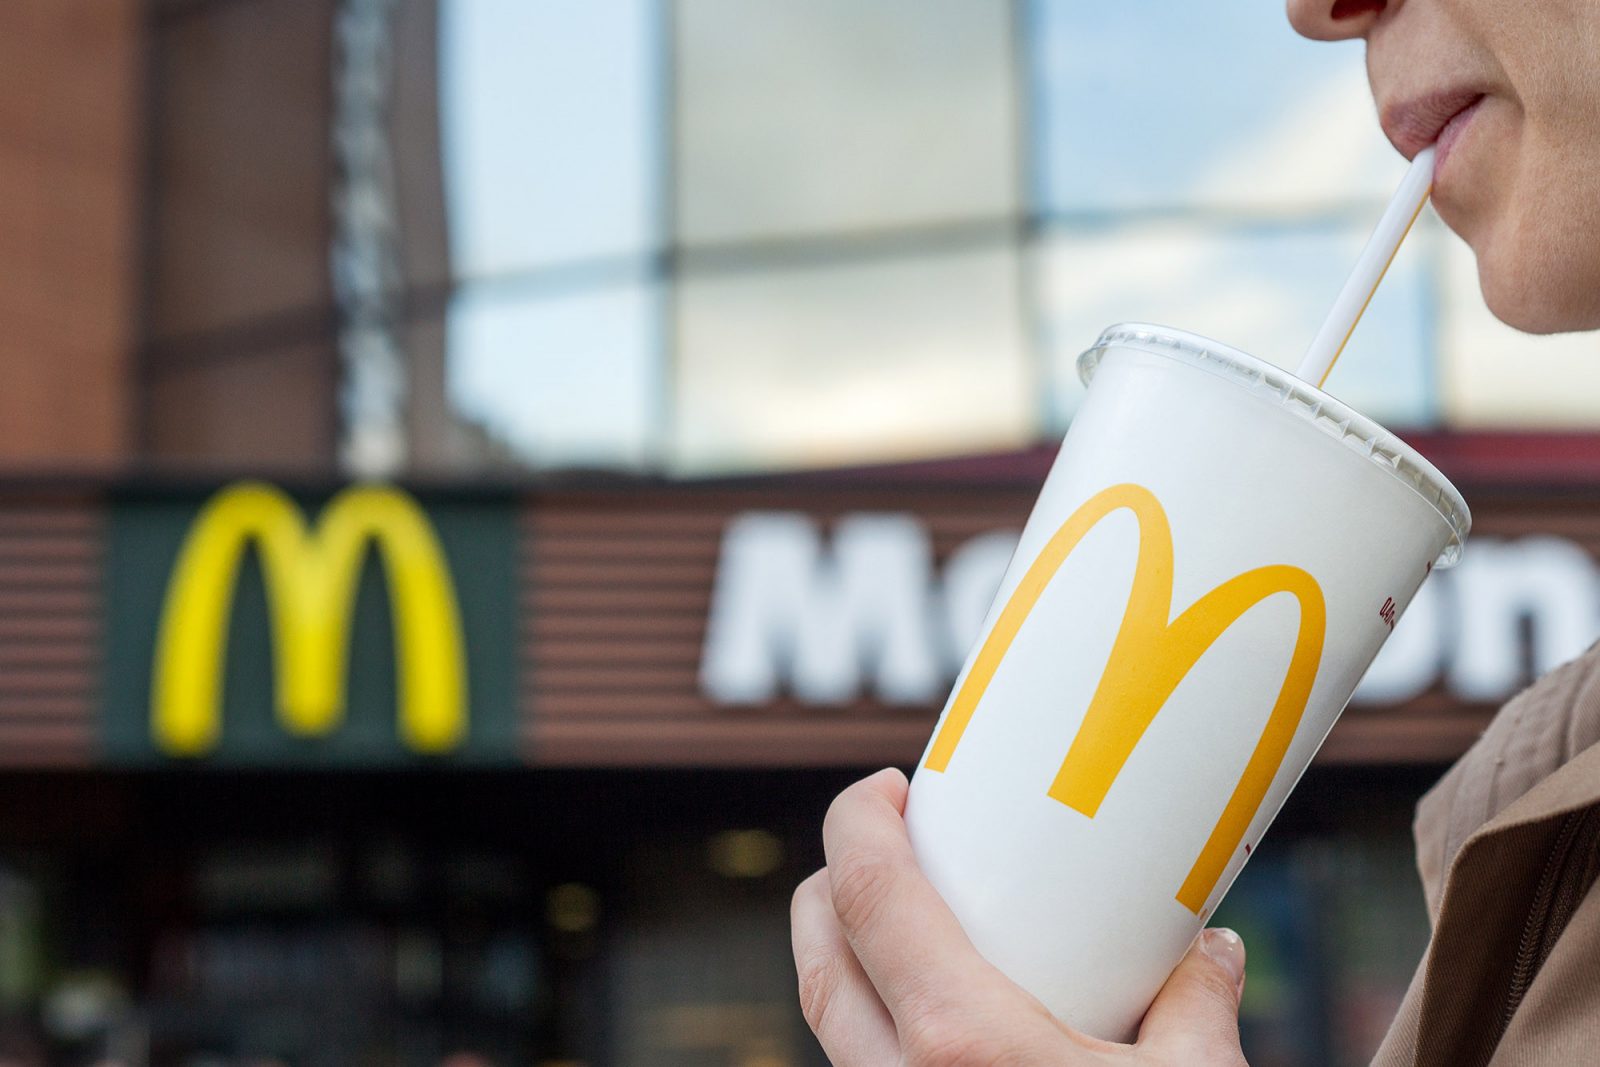 🍟 Want to Know Your Personality Type? Order a McDonald’s Meal to Find Out mcdonalds drinks